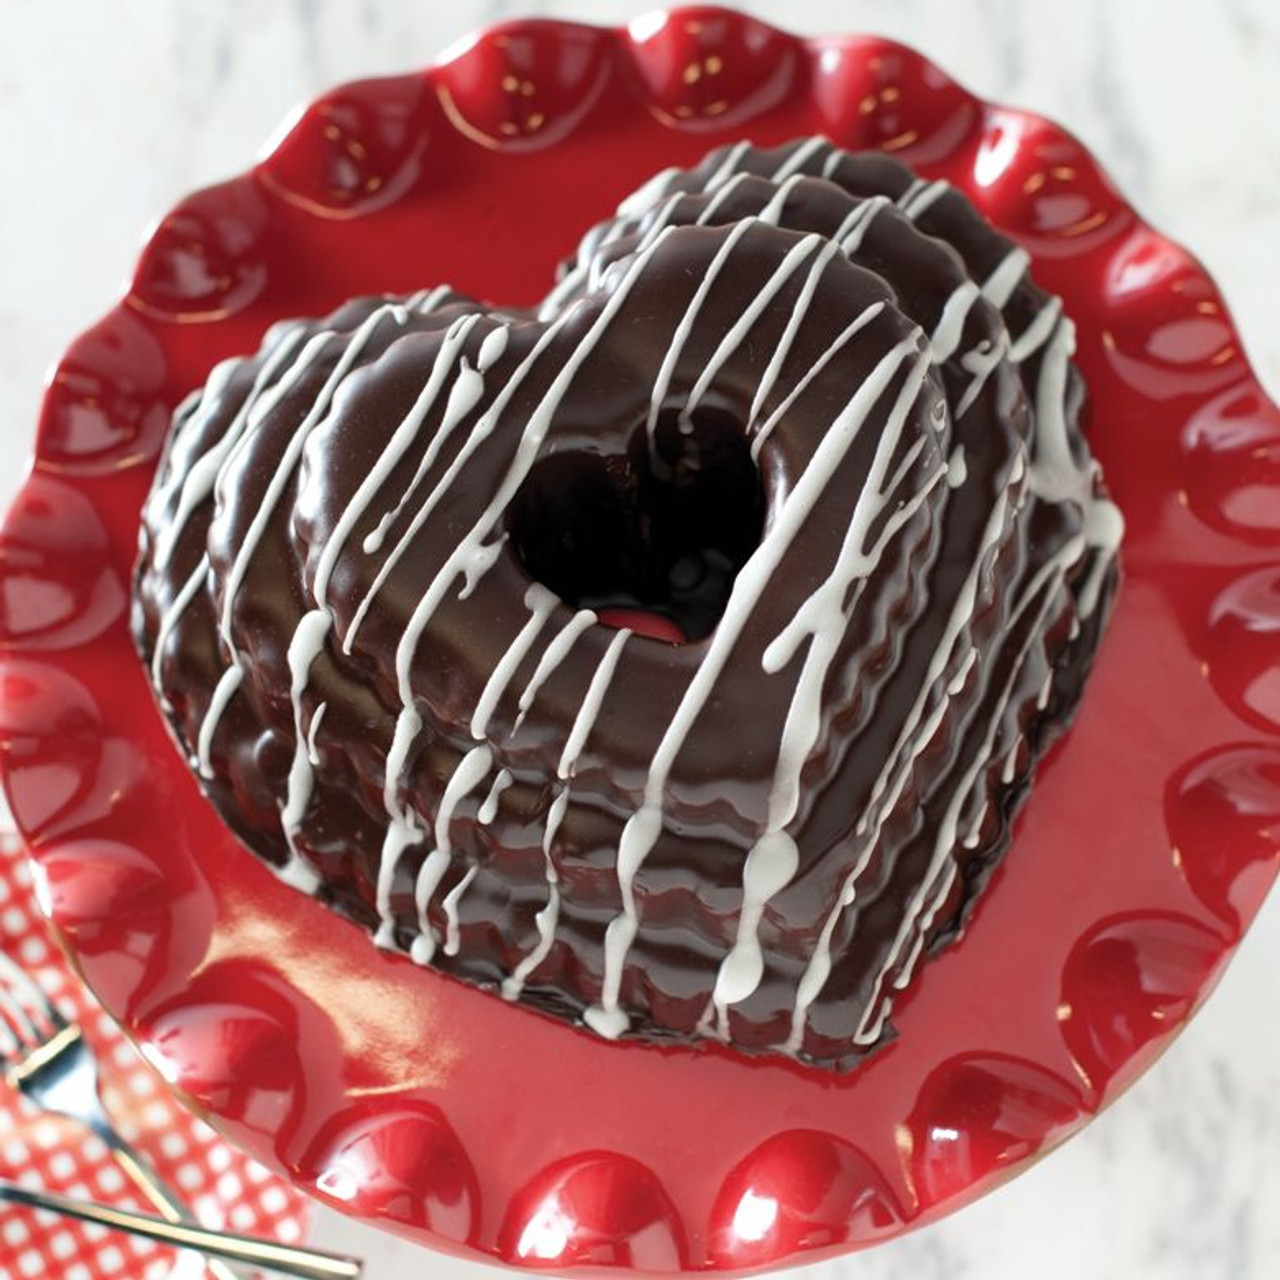 https://cdn11.bigcommerce.com/s-hccytny0od/images/stencil/1280x1280/products/741/3933/nordic-ware-tiered-heart-bundt-pan-4__69238.1583507143.jpg?c=2?imbypass=on